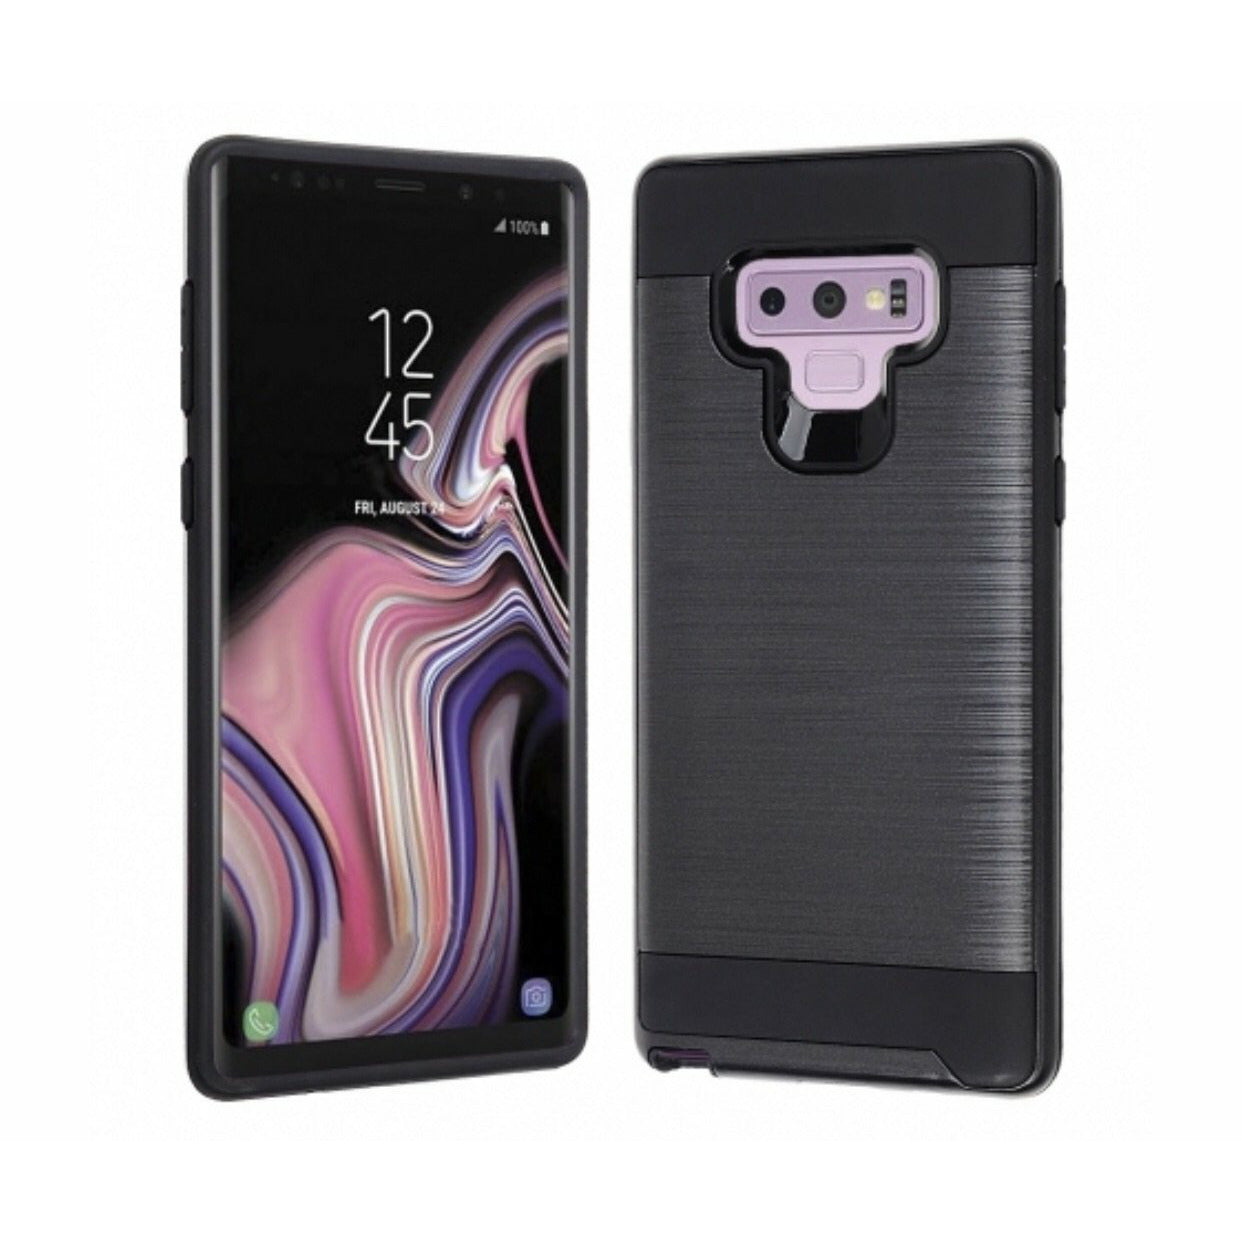 Samsung Galaxy Note 9 Brushed Hybrid Protector Cover - Black / Black